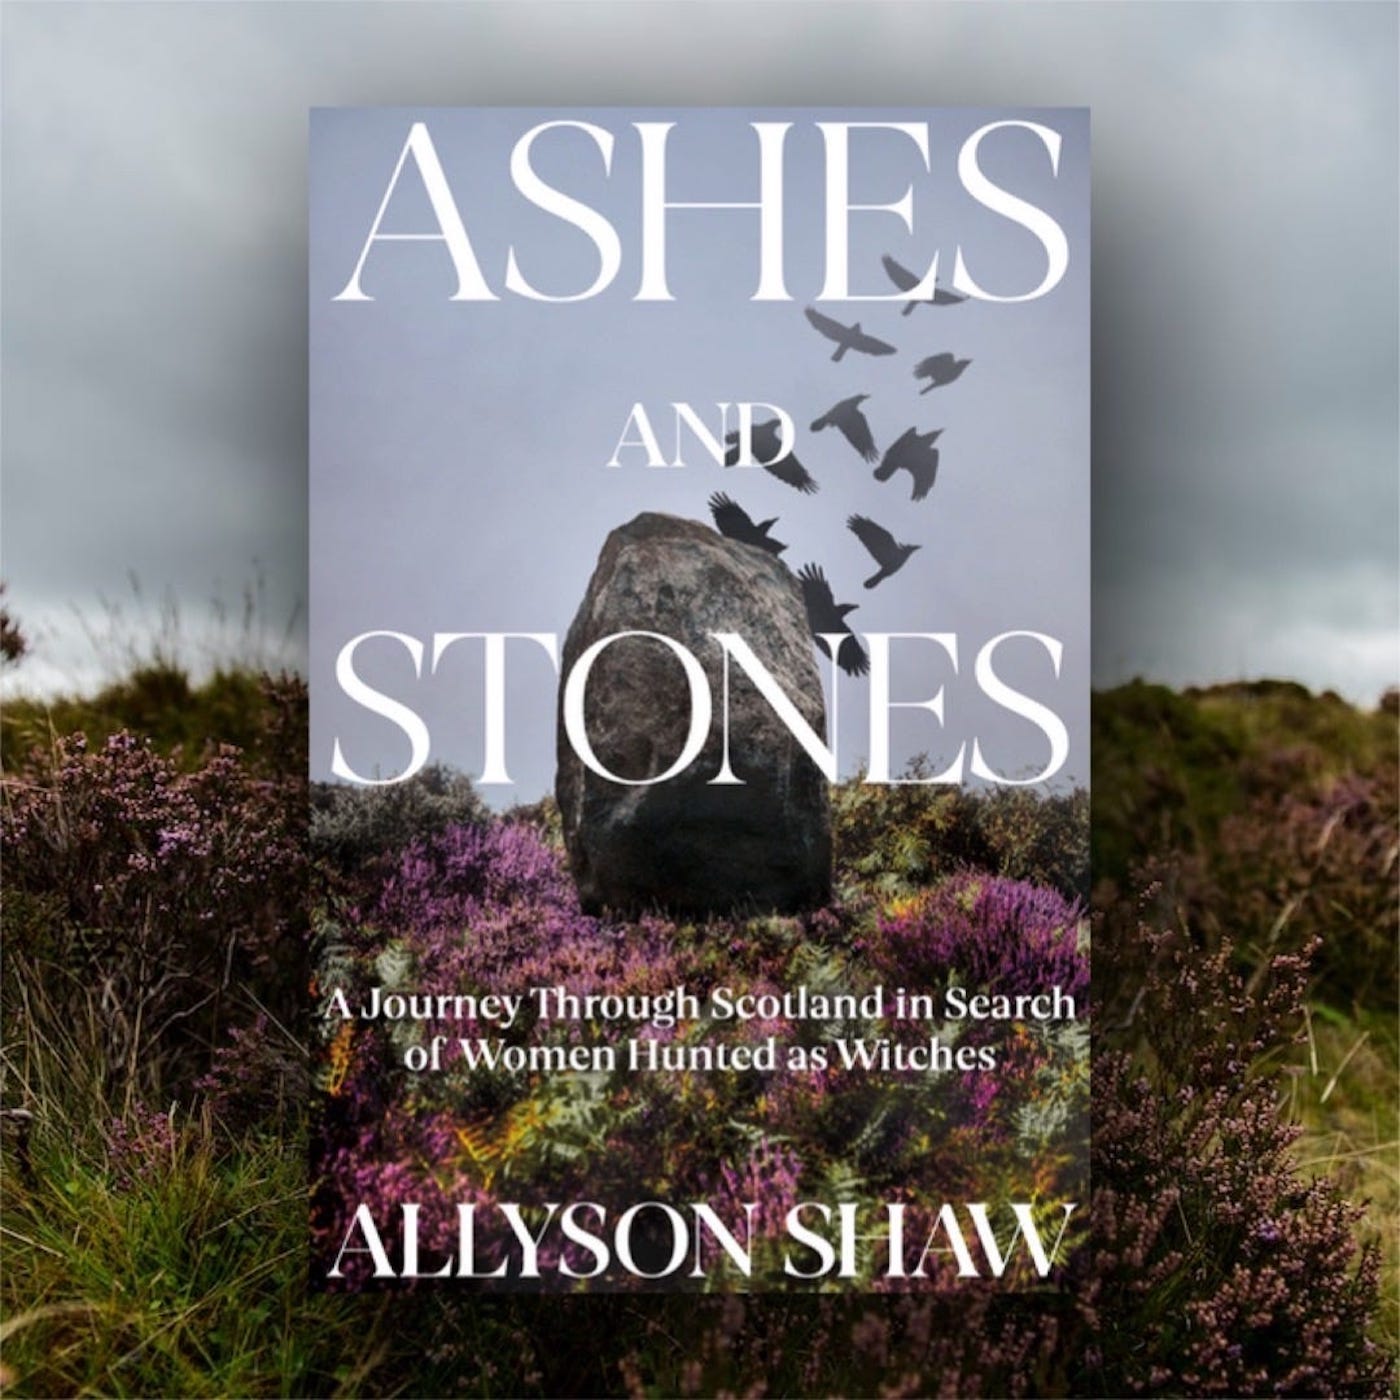 Image of Ashes and Stones, US Edition. The title is in white over a gloomy Scottish sky. A standing stone is in a heathery landscape and a murder of crows takes flight in the background. 